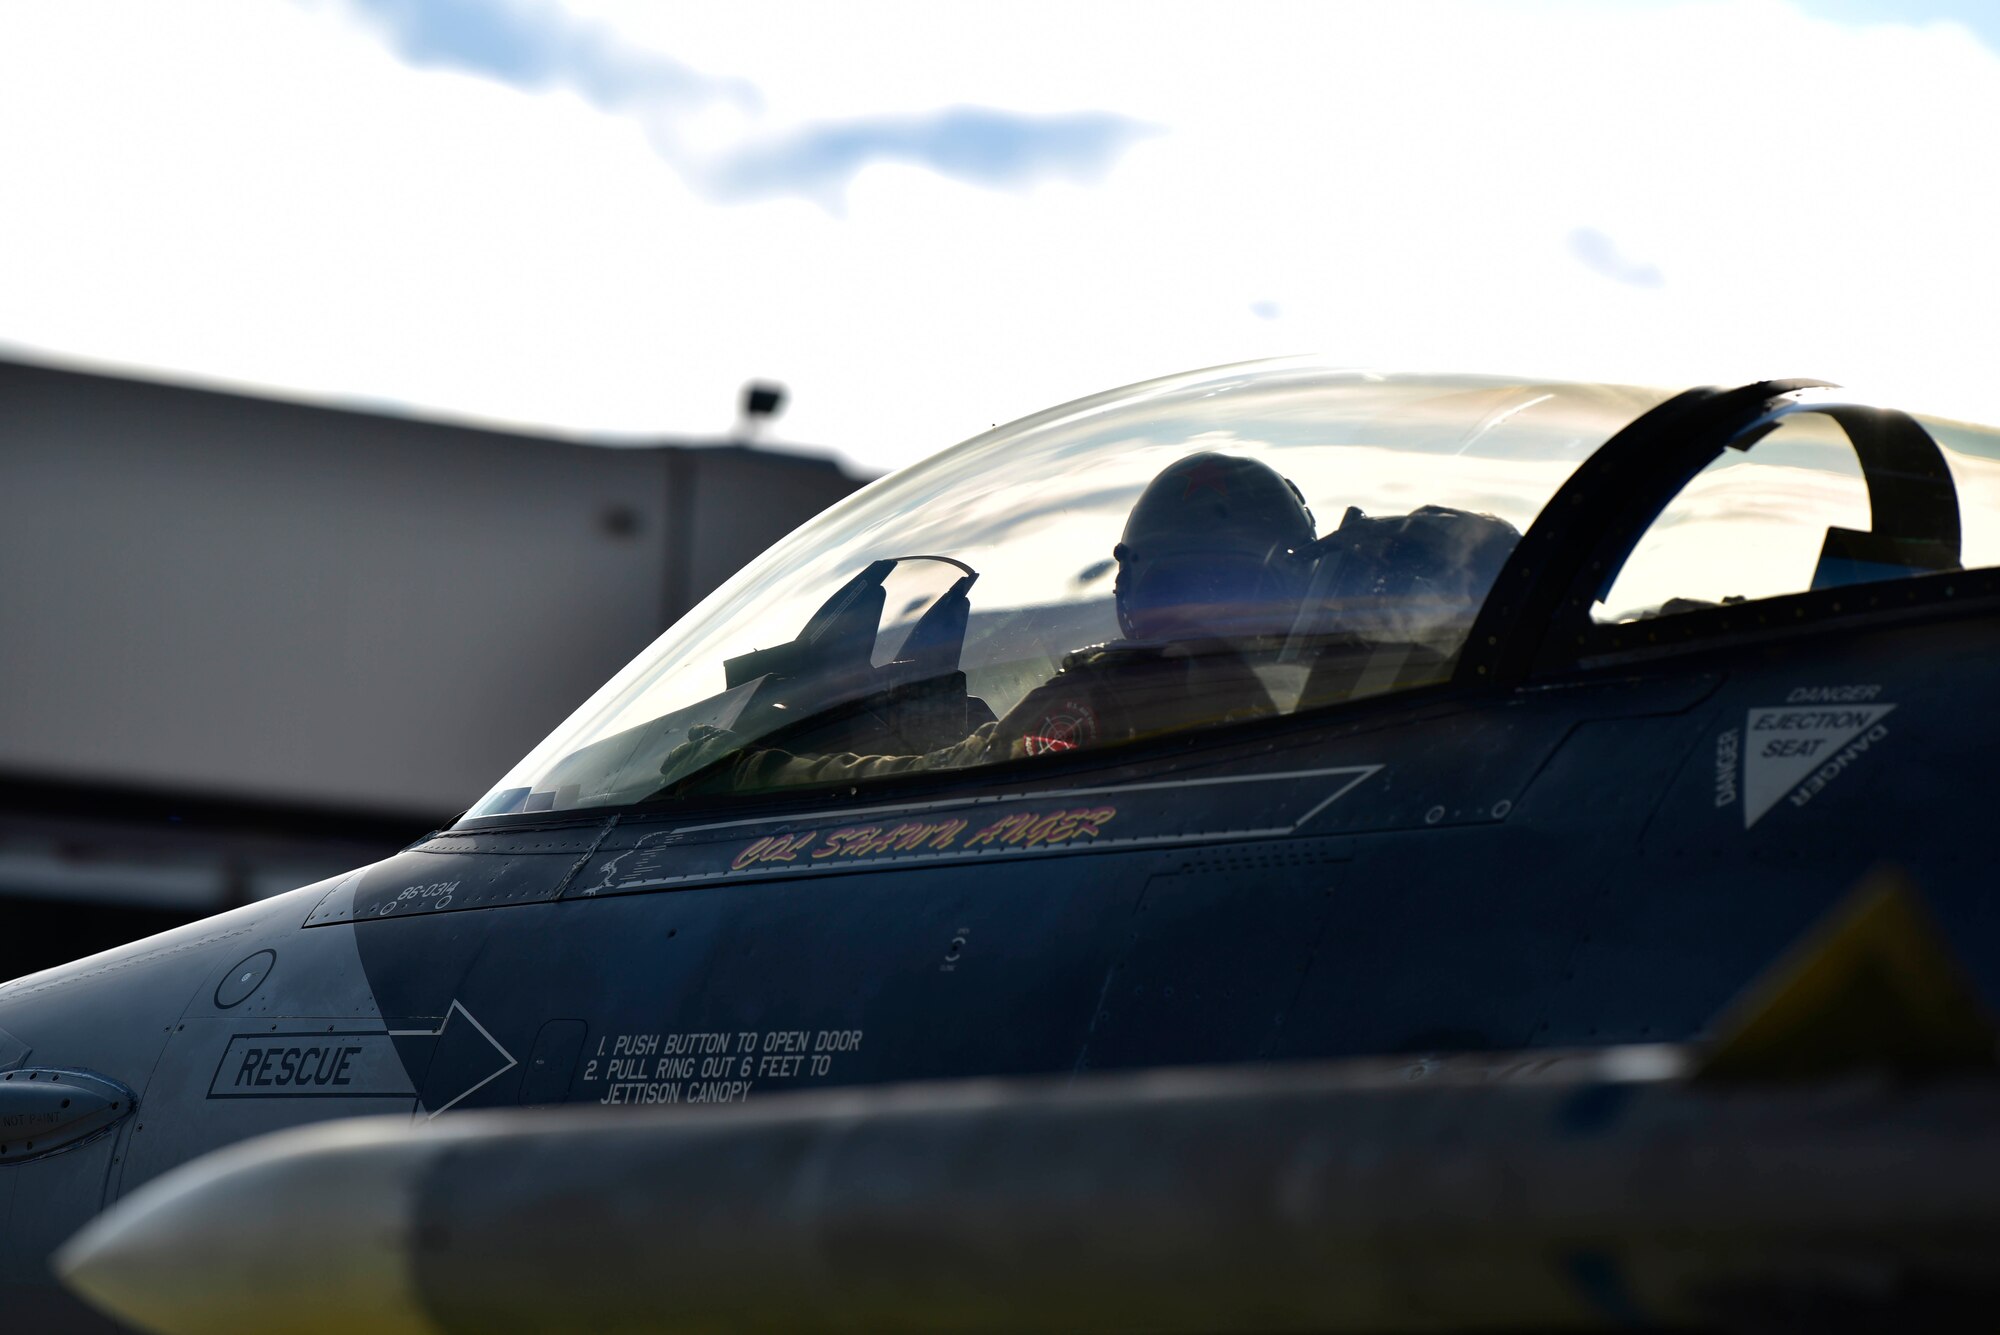 U.S. Air Force Col. Shawn E. Anger, the 354th Fighter Wing commander, taxis on the flight line Aug. 13, 2020, during his fini flight at Eielson Air Force Base, Alaska. Anger was responsible for providing realistic combat adversary training to United States and allied forces in air, space, and information operations via RED FLAG-Alaska. (U.S. Air Force photo by Senior Airman Beaux Hebert)